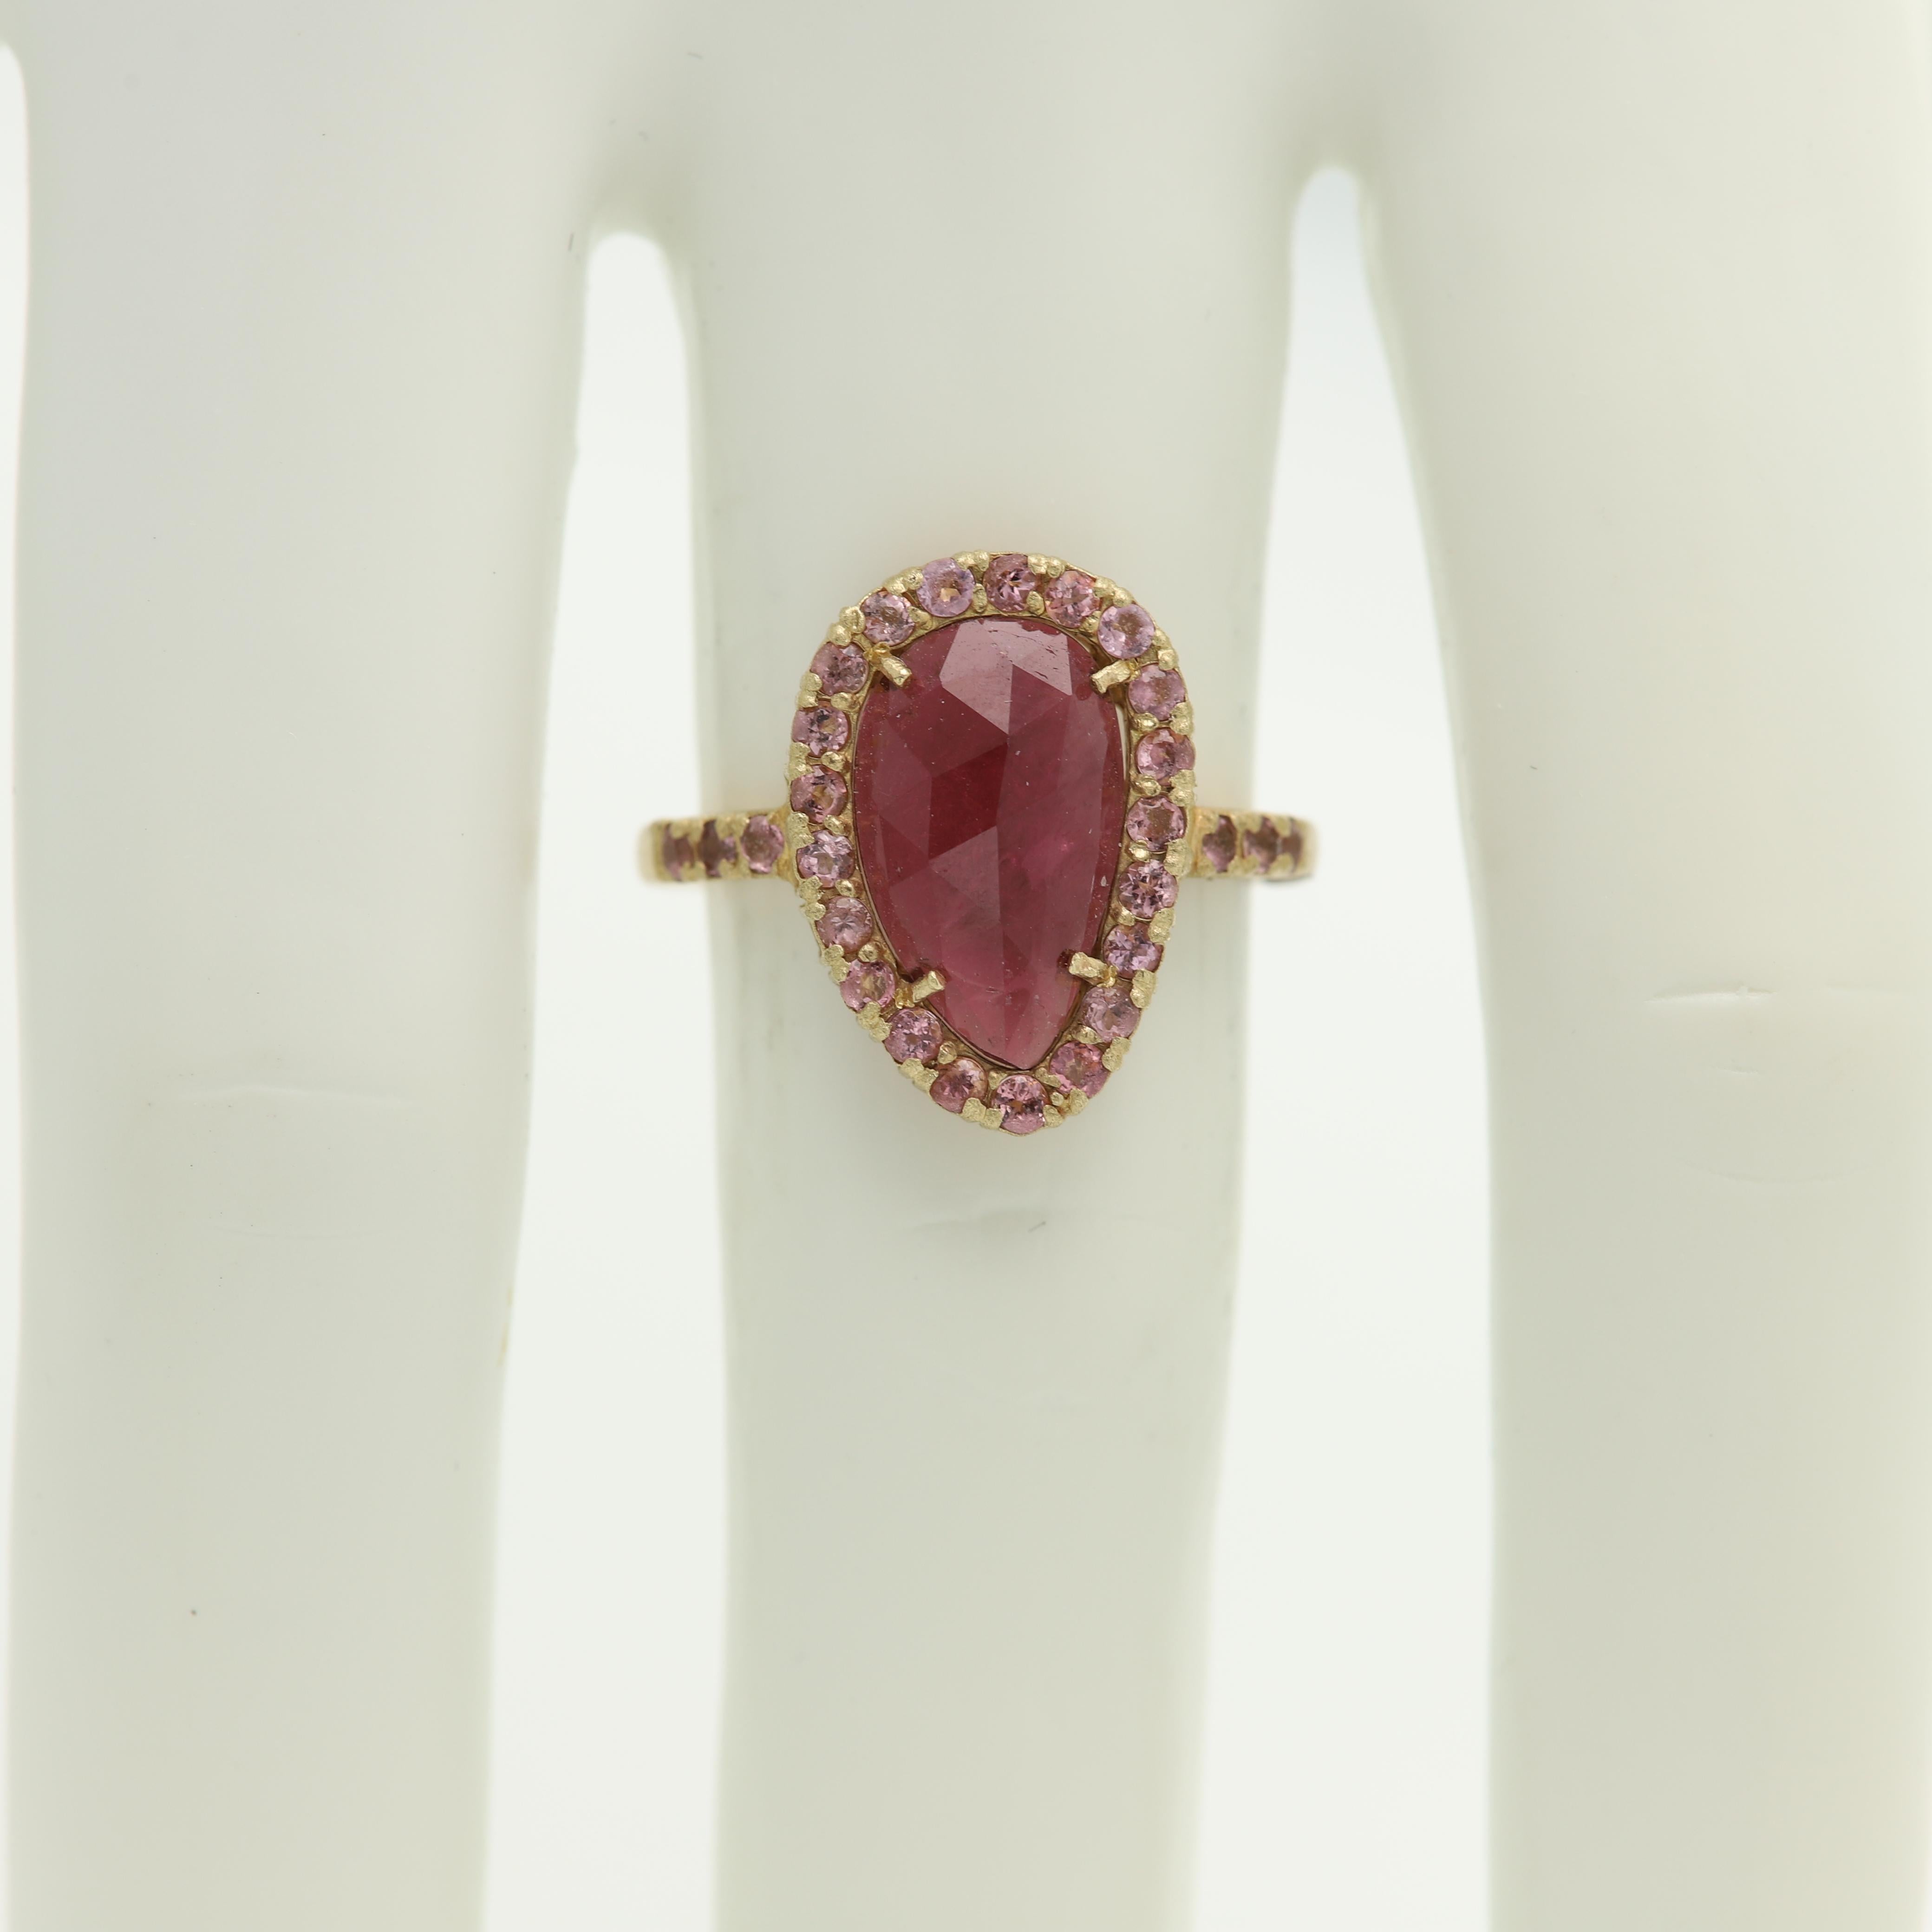 NEW 
Vintage Pink Tourmaline Ring - Hand Made in Italy
14k Yellow Gold 4.0 grams - mat finish (not shiney gold)
Small Round Pink Tourmaline arround on the sides 0.50 ct
Center is a 